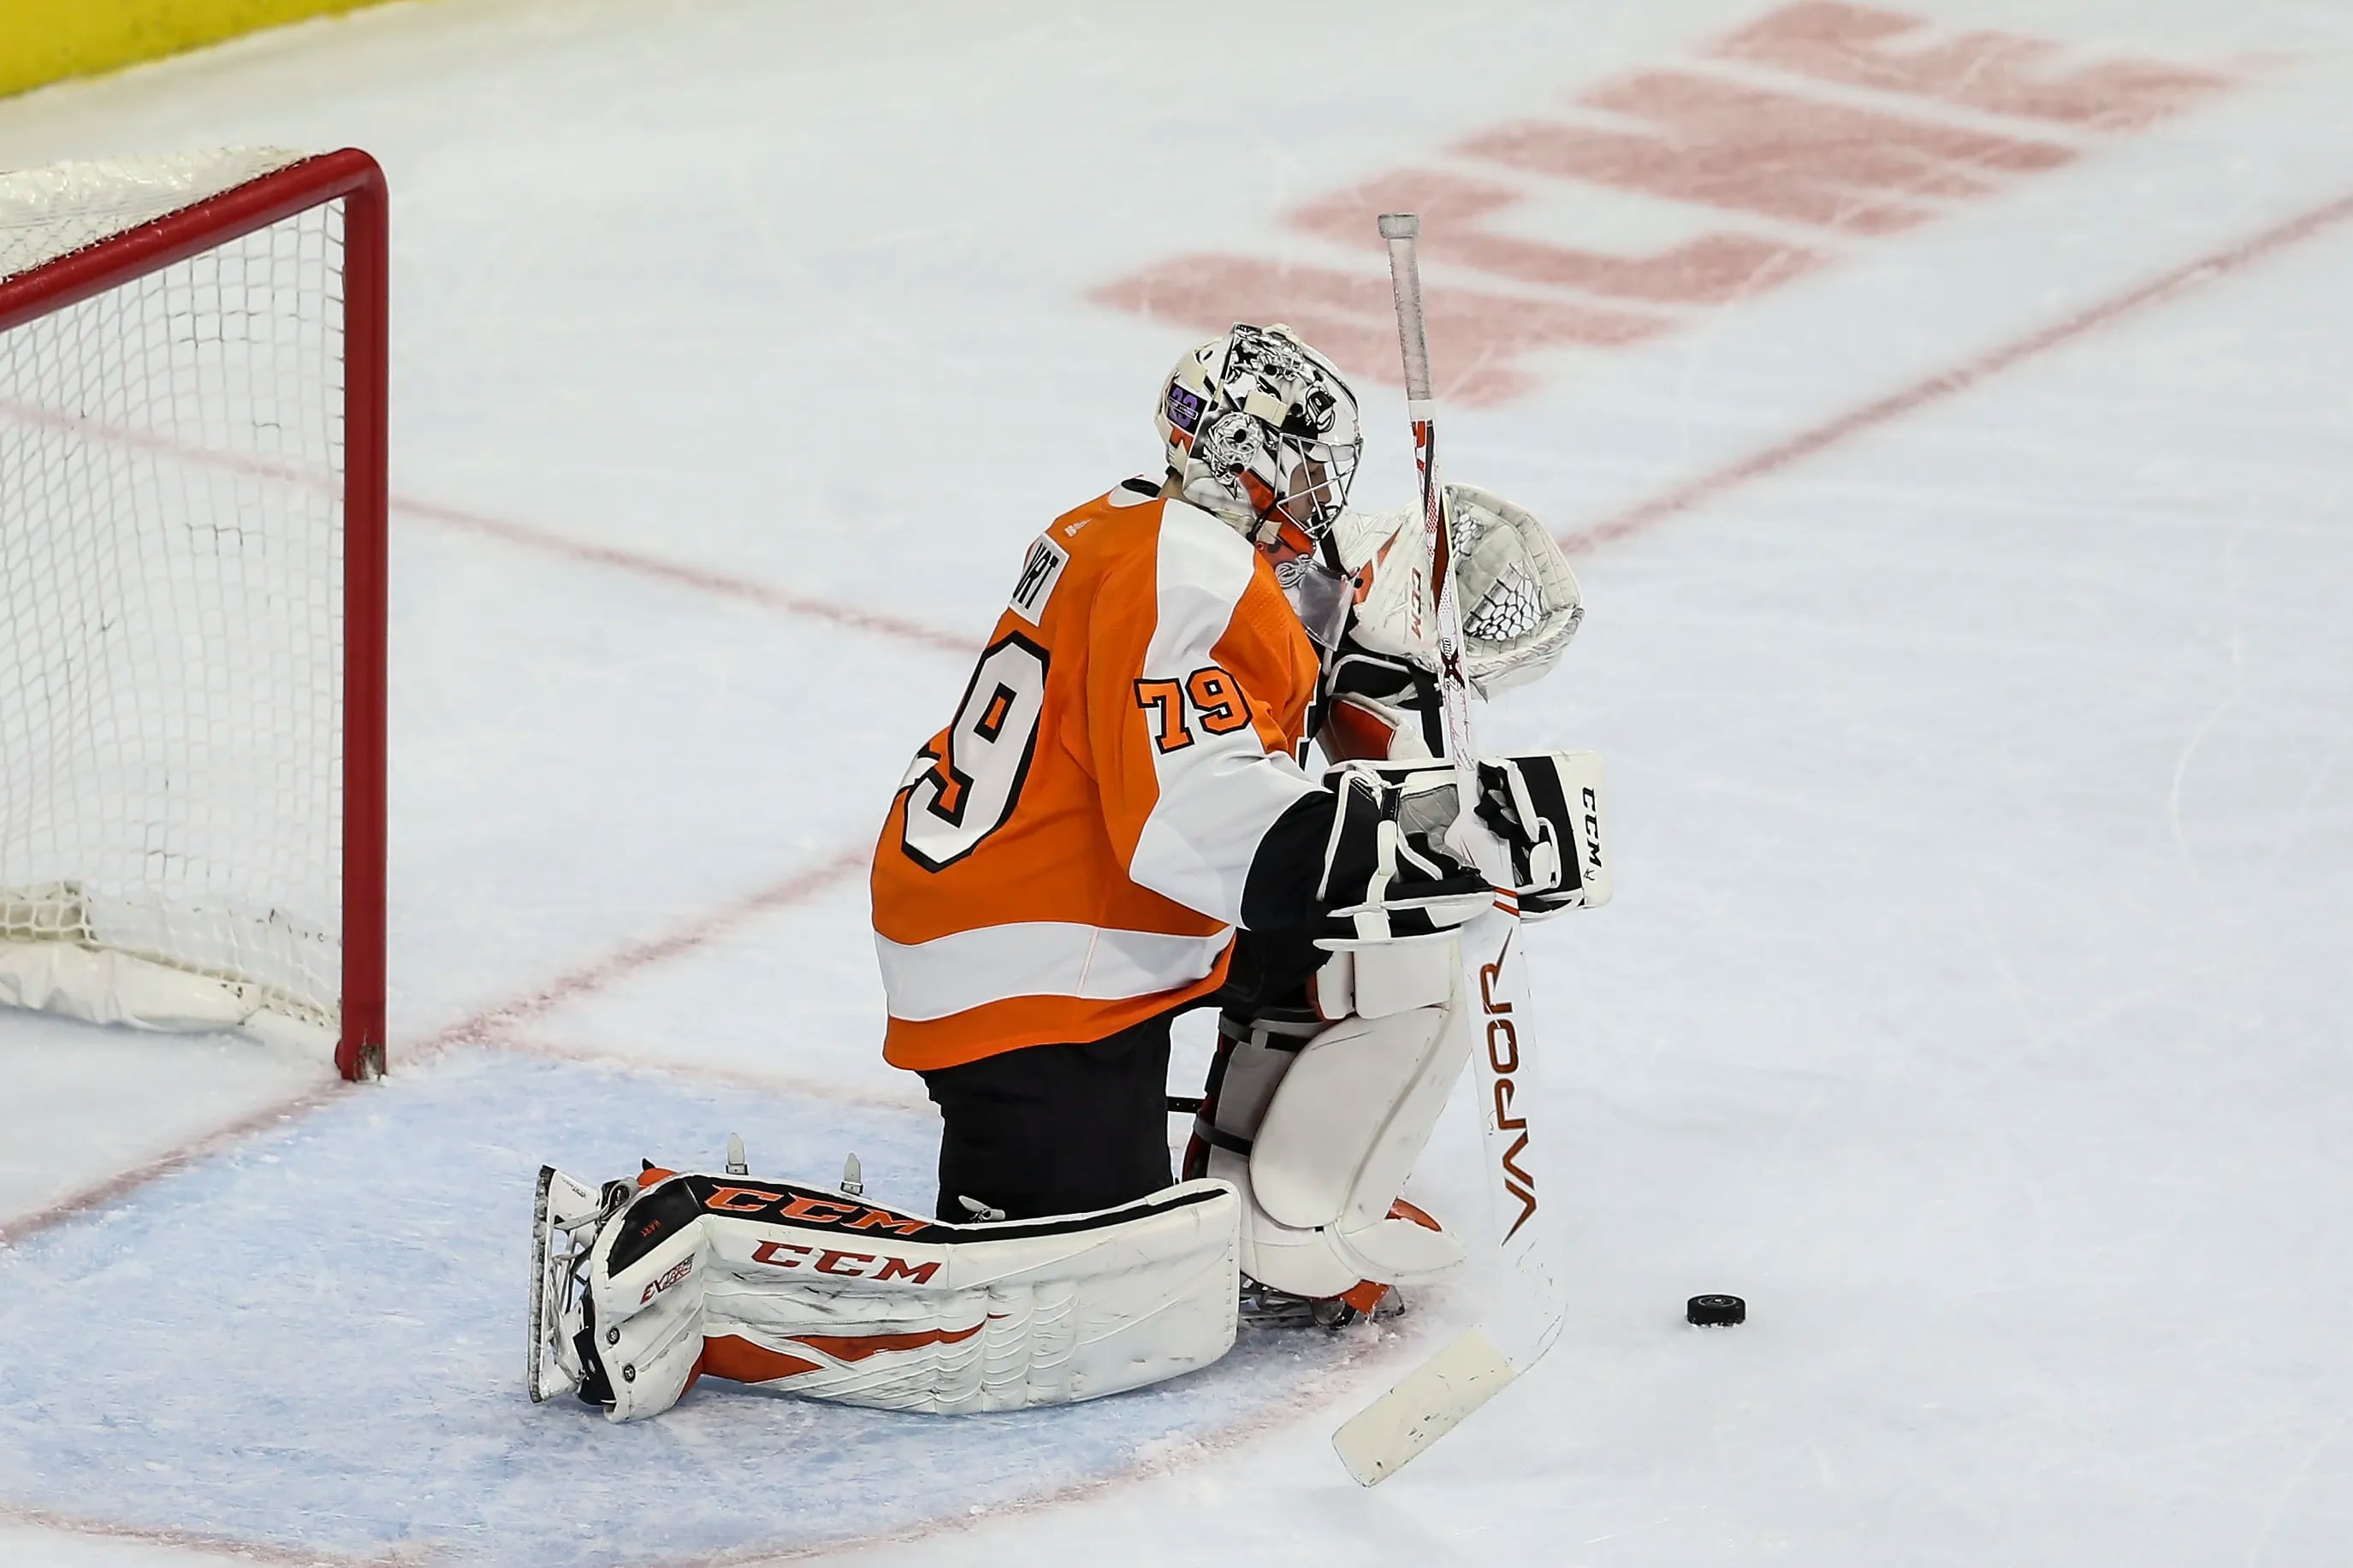 Hart Makes Goal Line Save to Seal Flyers Win in Detroit